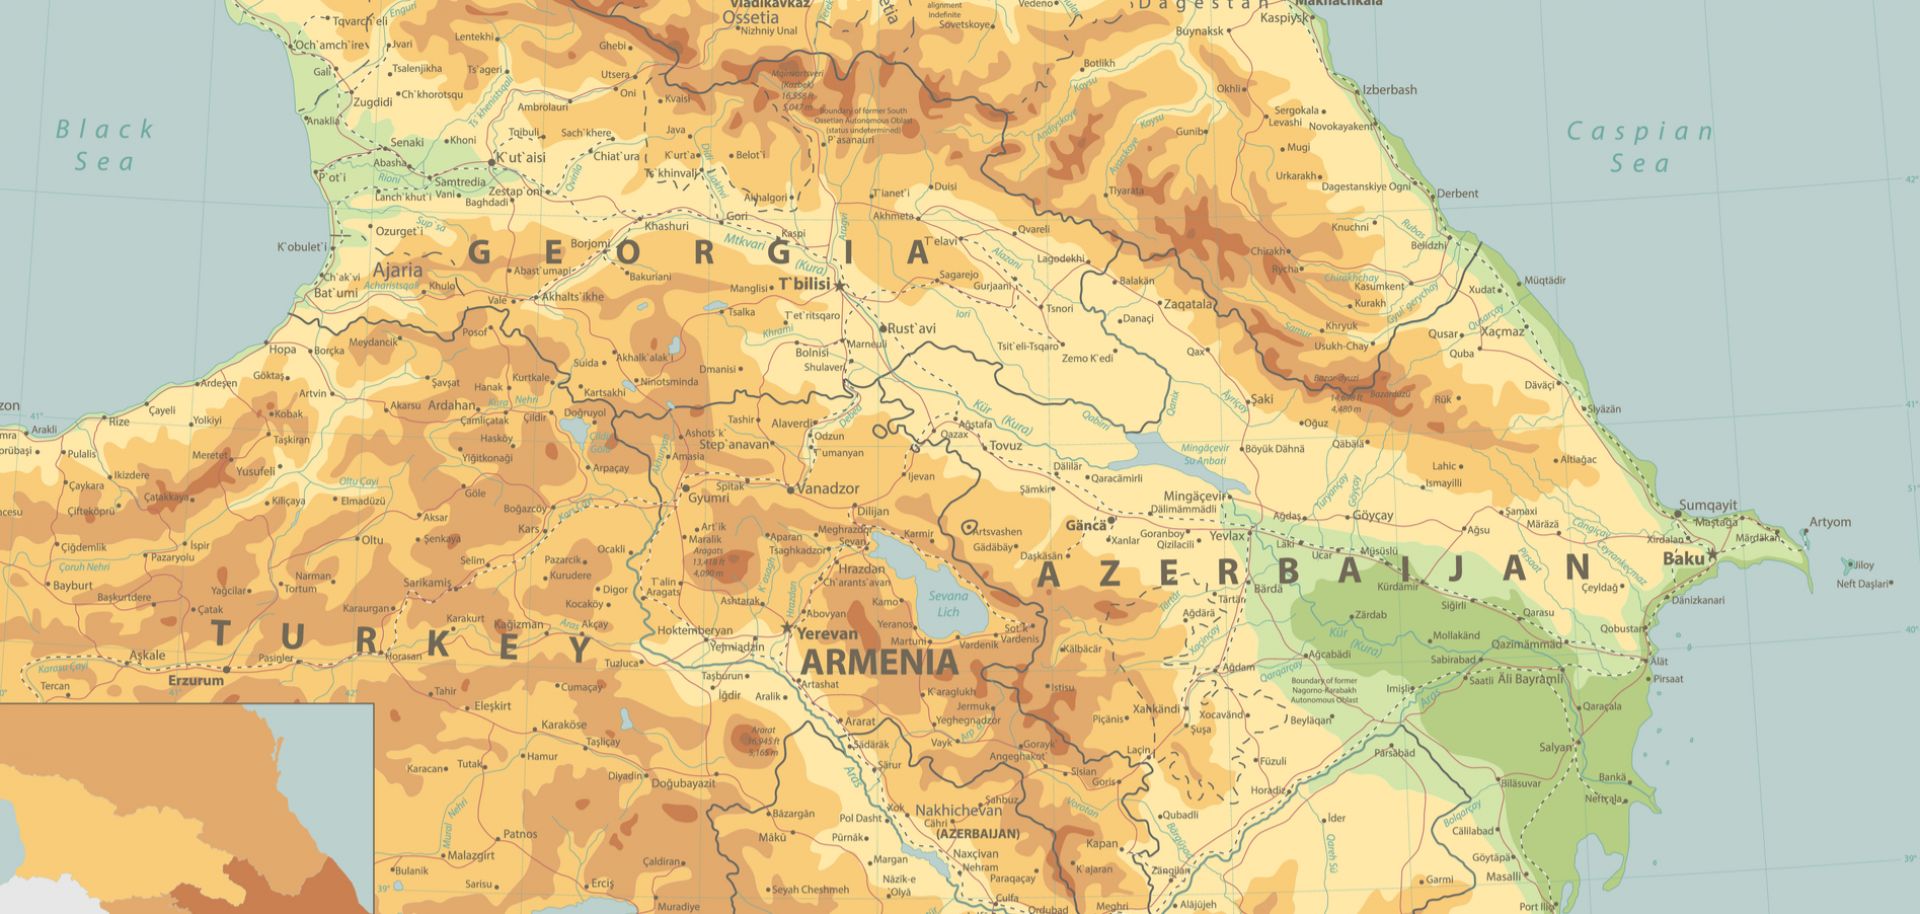 A physical map of the Caucasus